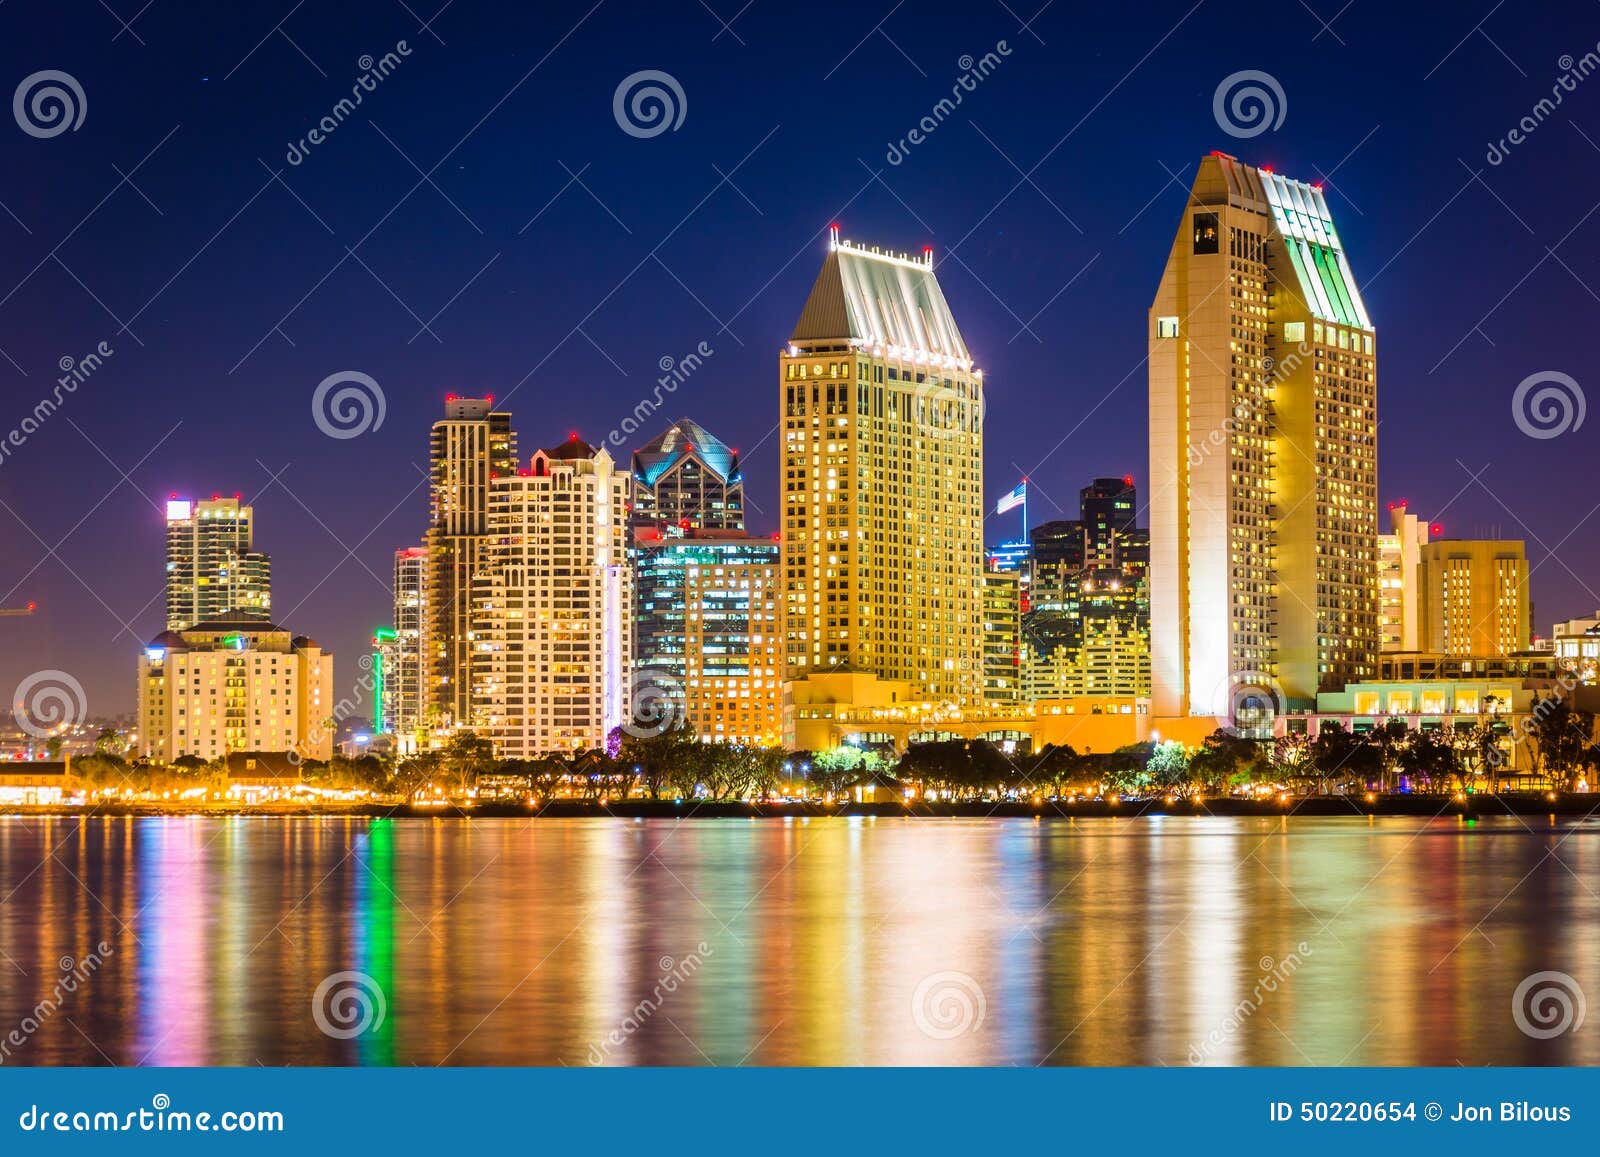 the san diego skyline at night, seen from centennial park, in co